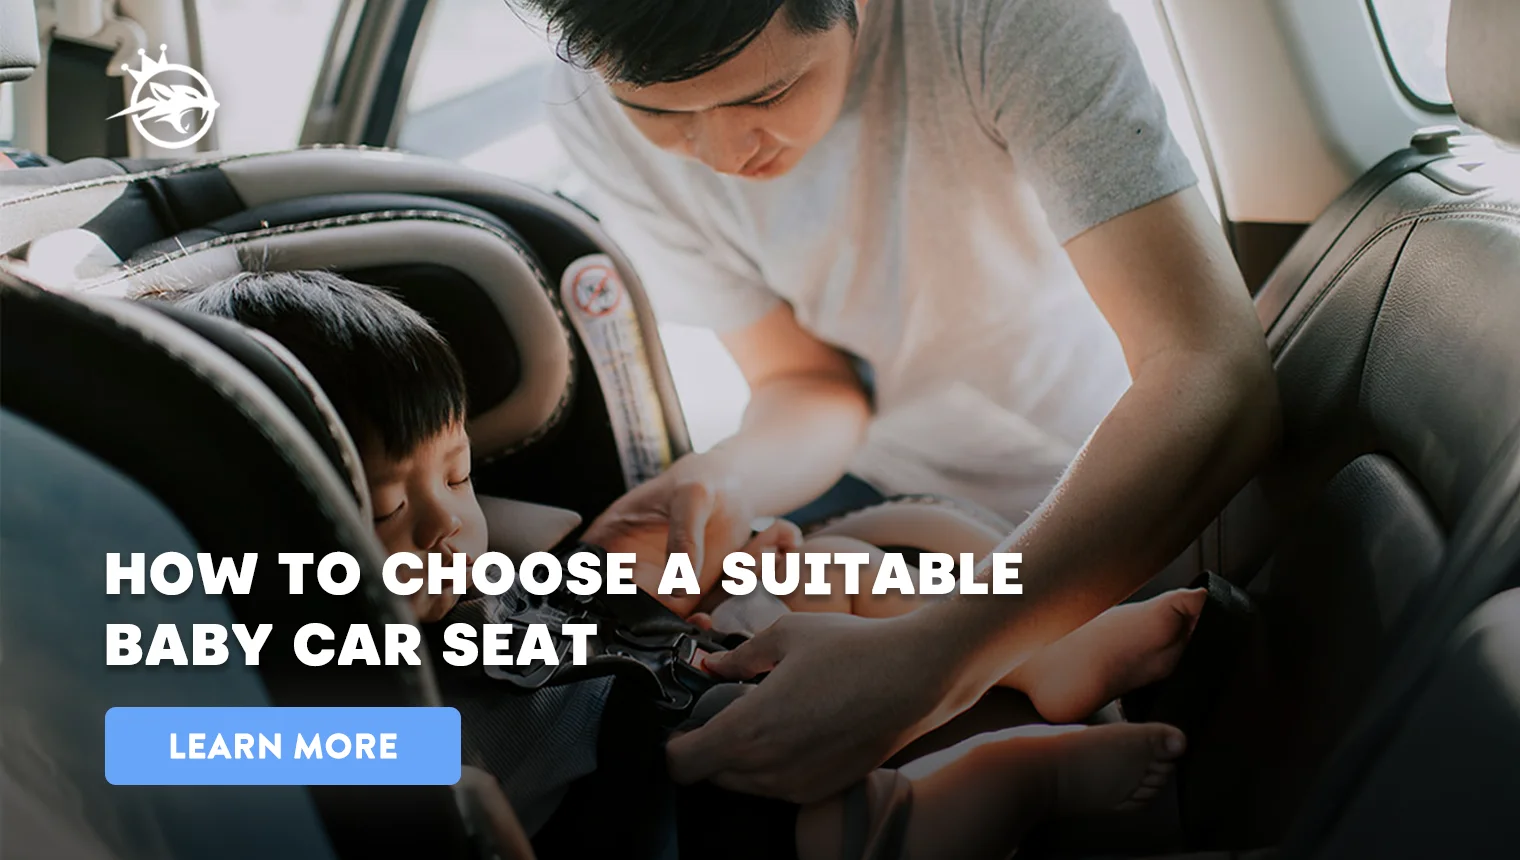 How to choose a suitable baby car seat